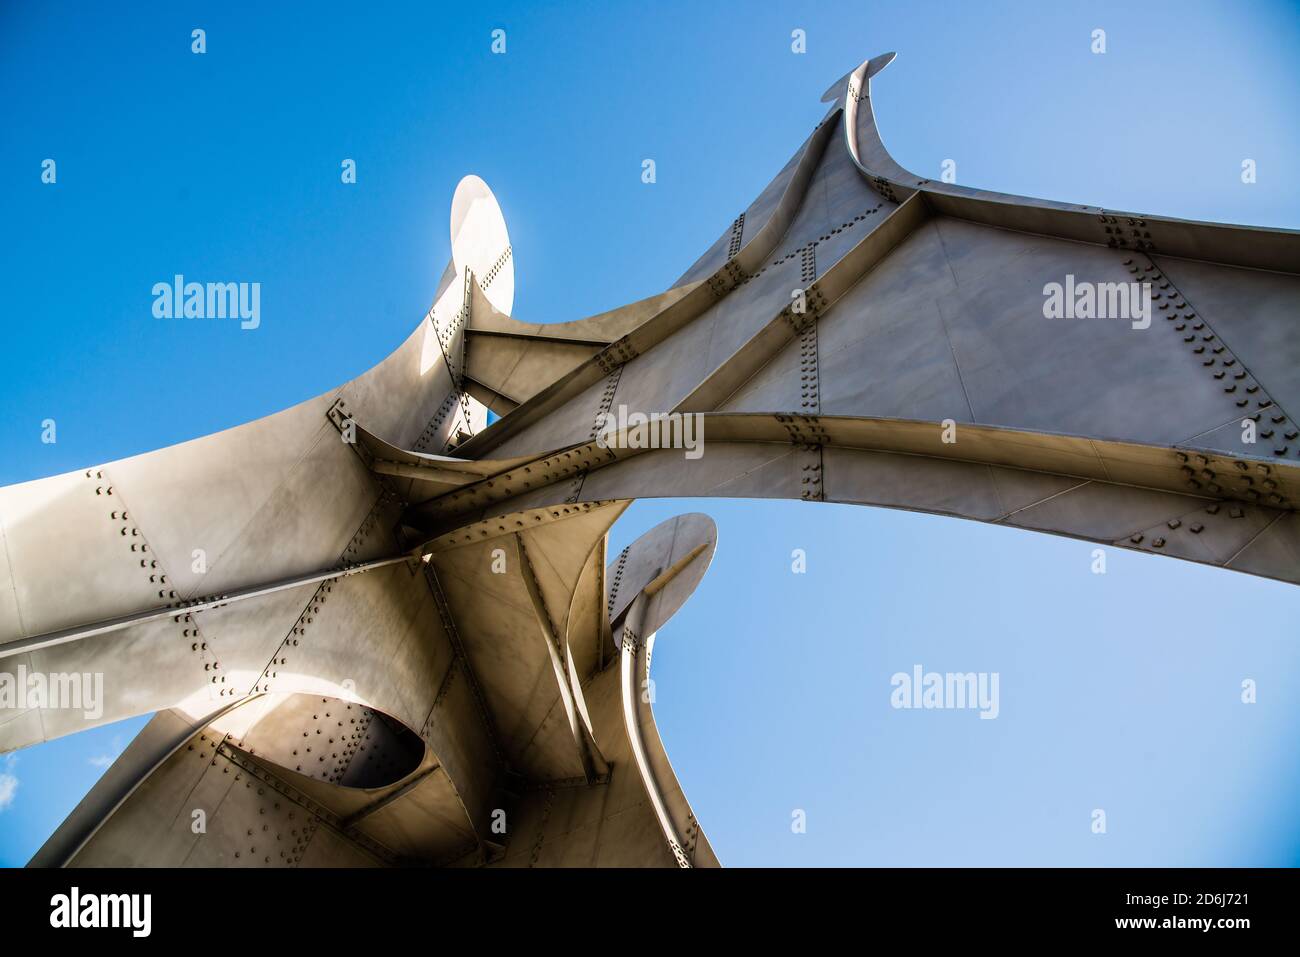 Montreal, Canada - Oct. 10 2020: Perspective of Three Discs Sculpture at Jean Drapeau park in Montreal Stock Photo